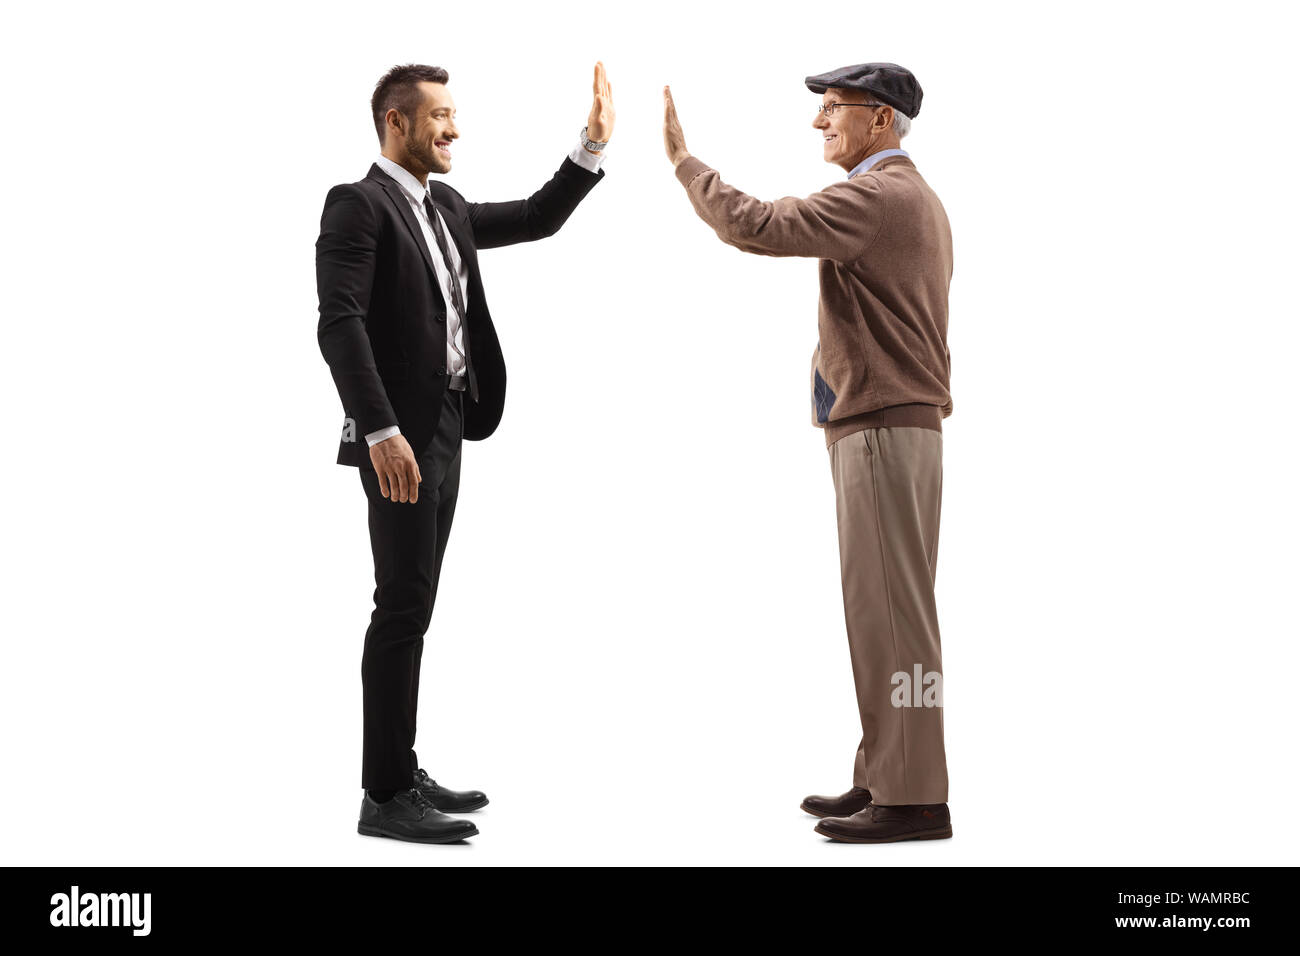 Full length profile shot of a businessman gesturing high-five with a senior man isolated on white background Stock Photo